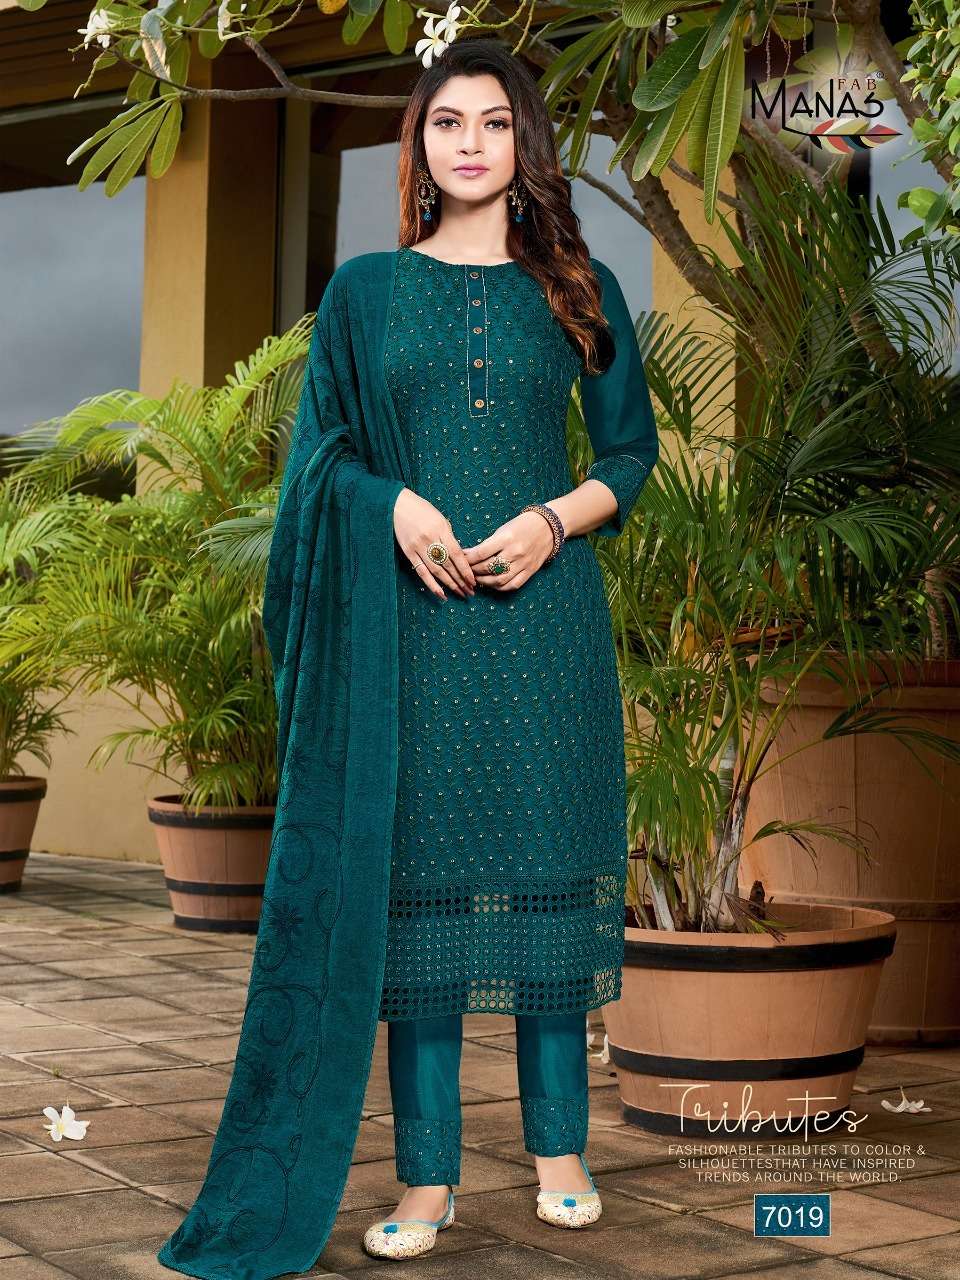 MANAS FAB PRESENTS SCHIFFLI VOL 4 GEORGETTE WHOLESALE READYMADE COLLECTION